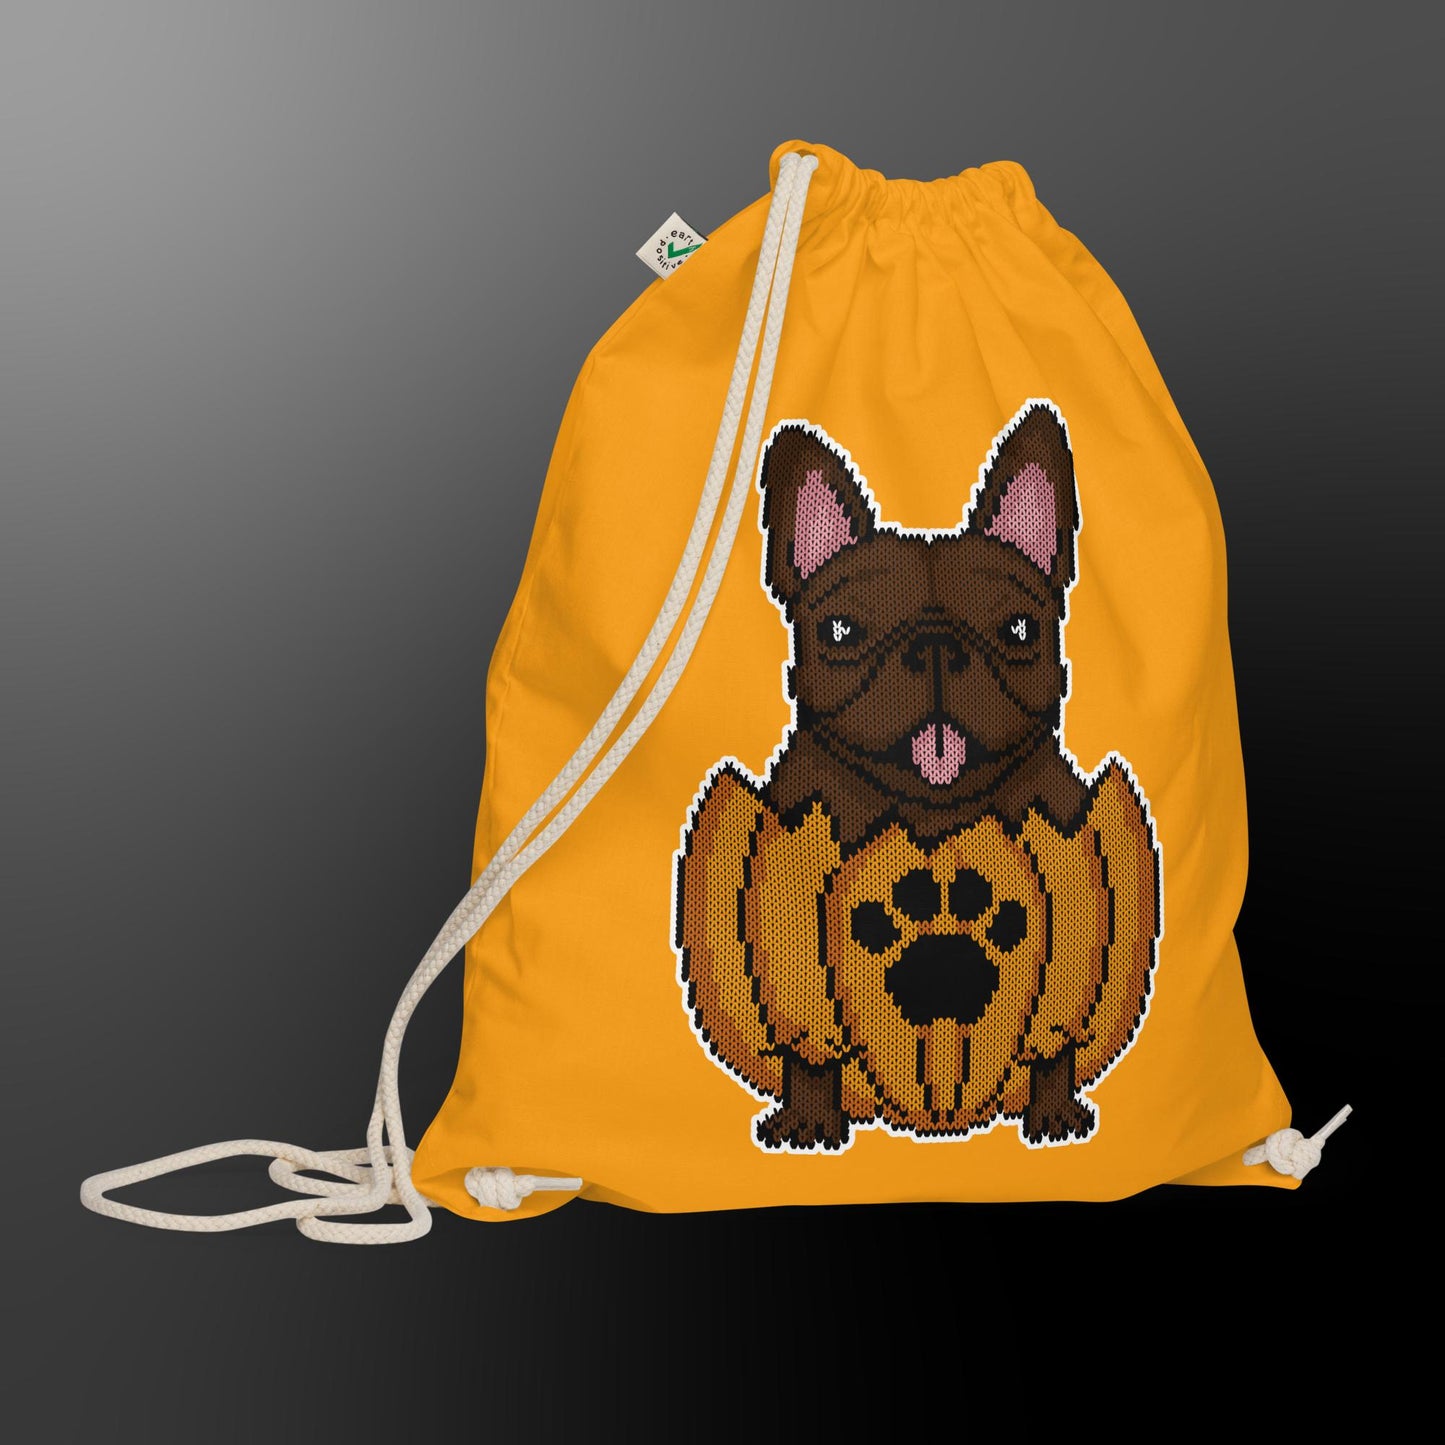 Halloween sports bag with frenchie (fur color brown)